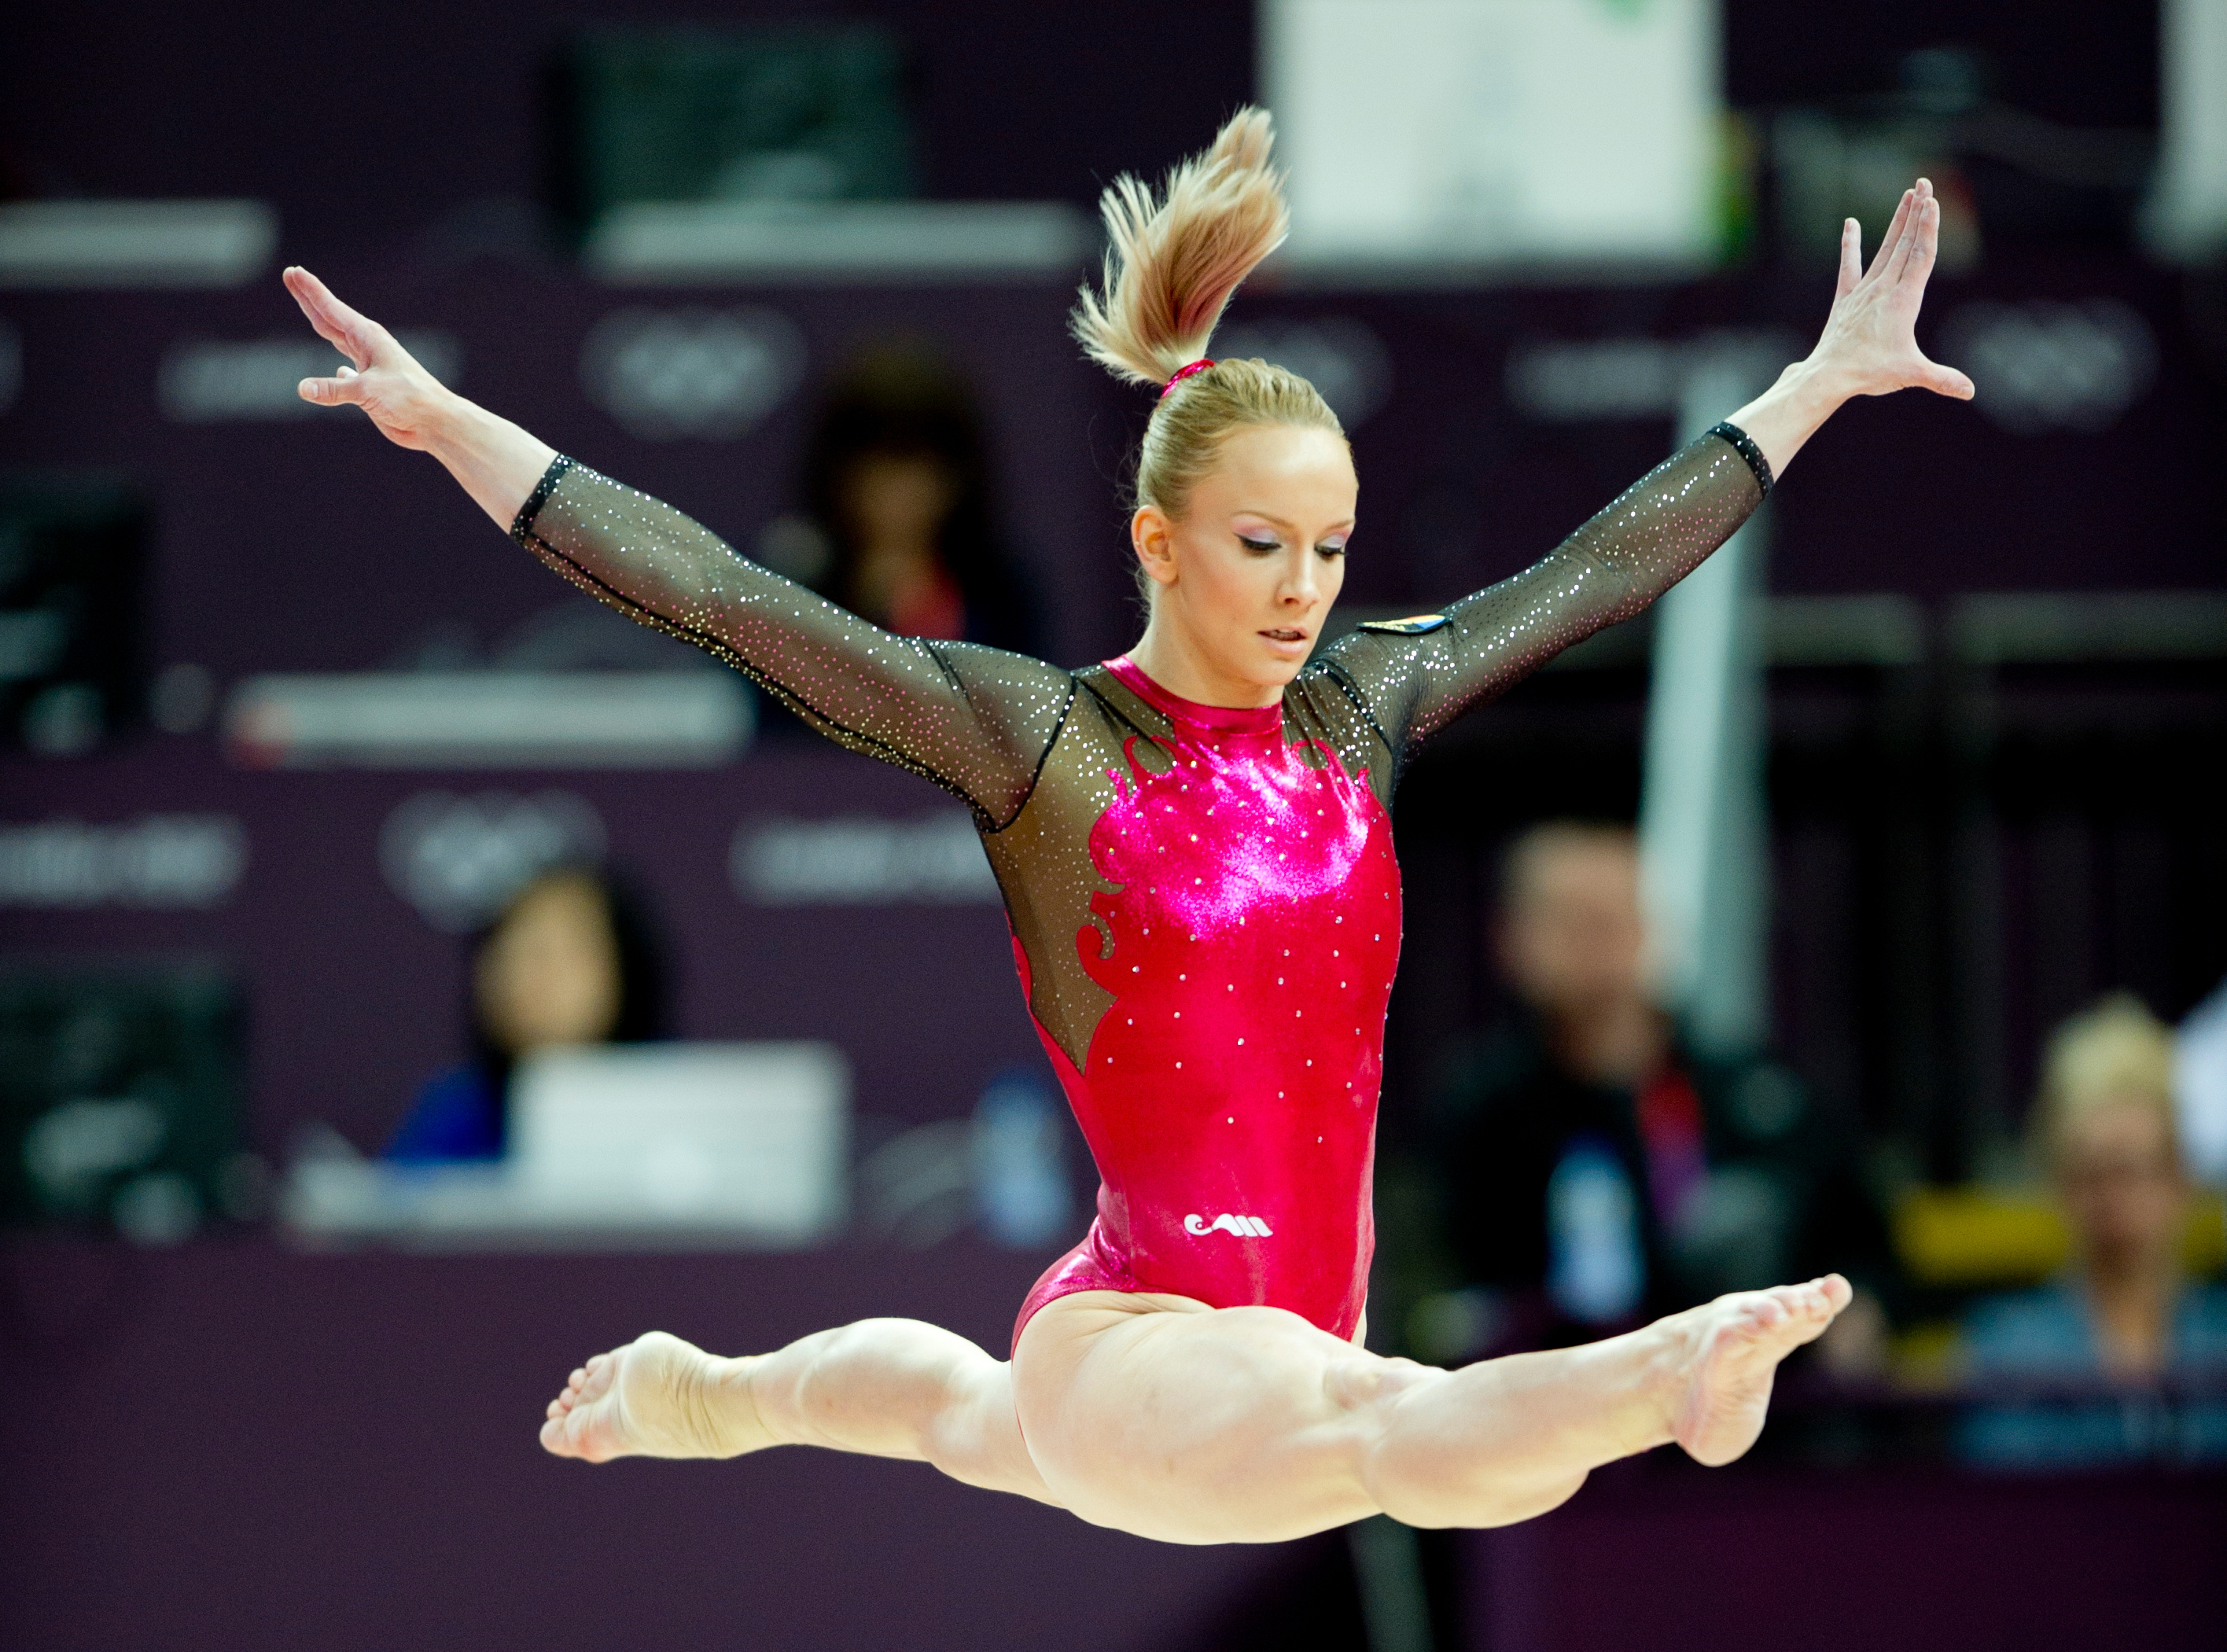 Acrobatic Sports: WAG, The floor exercise event, A choreographed routine. 2840x2110 HD Wallpaper.